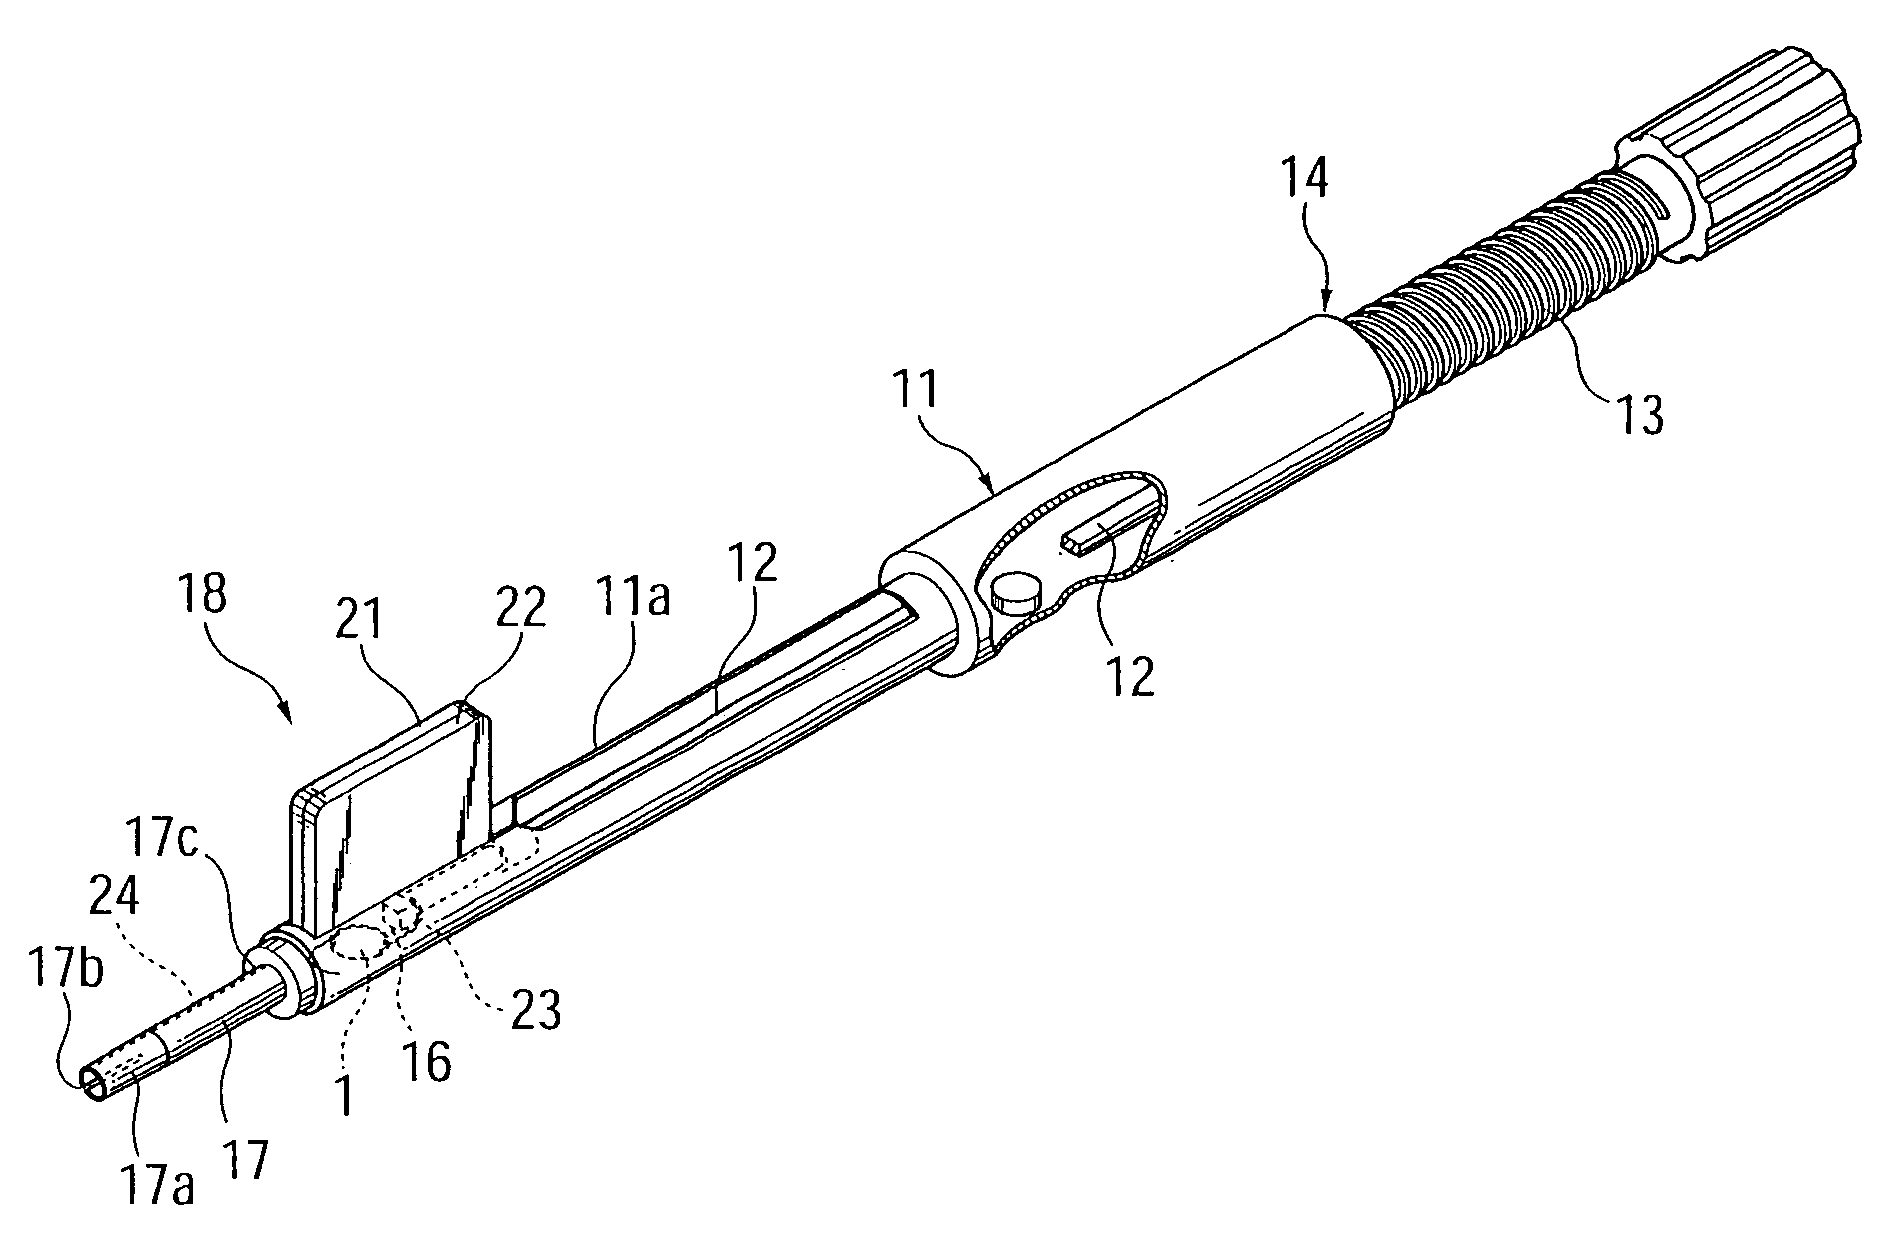 Insertion device for an intraocular lens